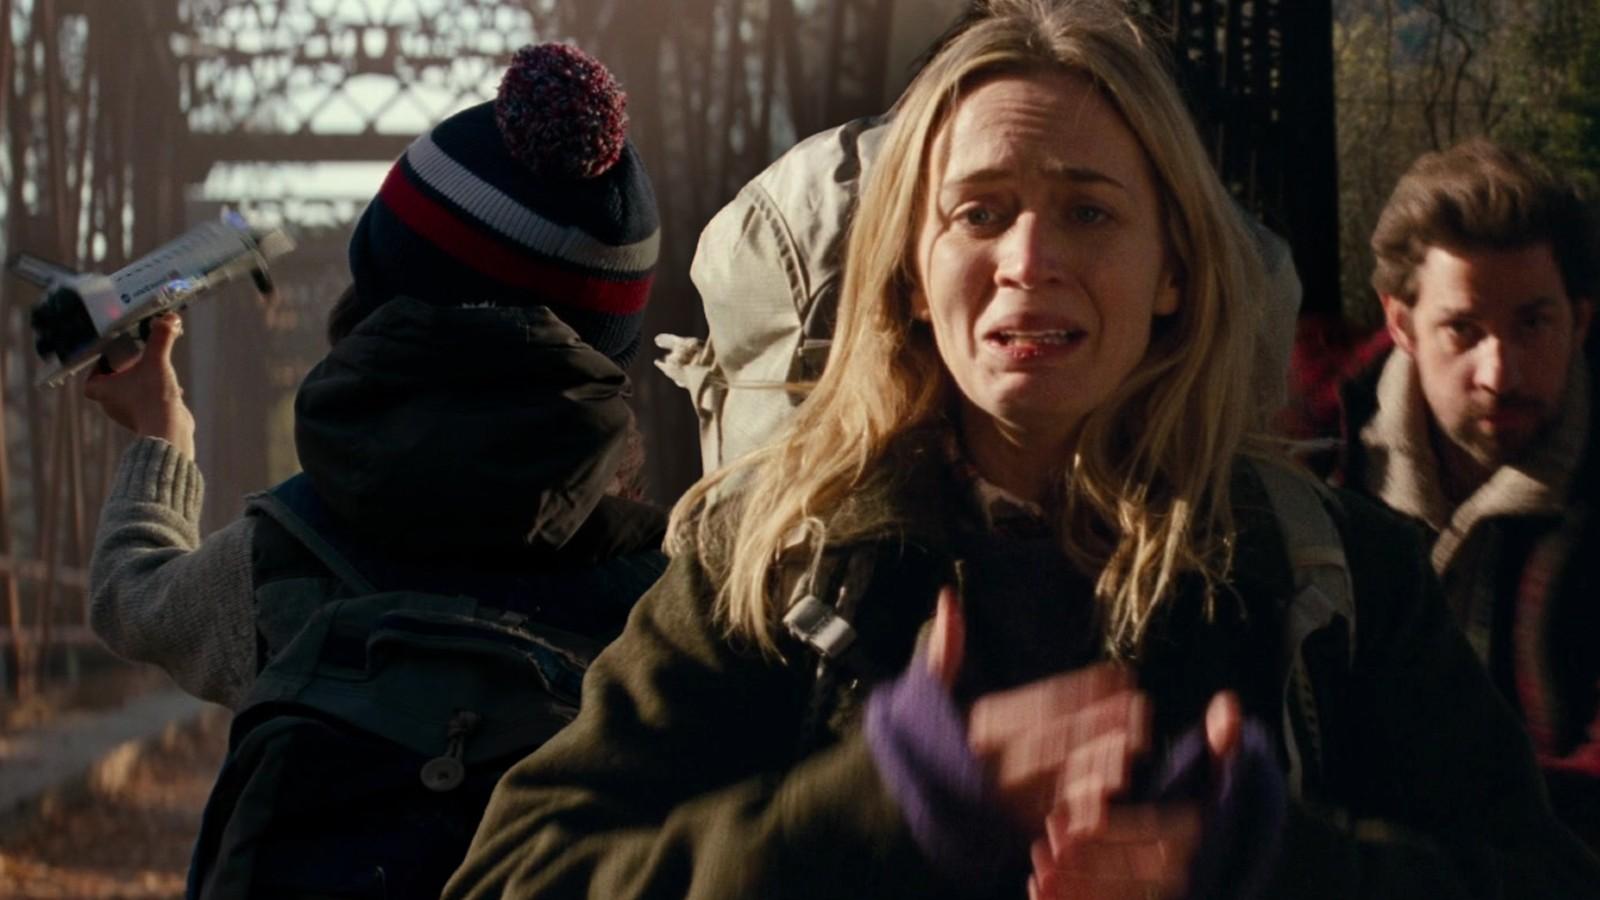 Two shots of the opening scene in A Quiet Place